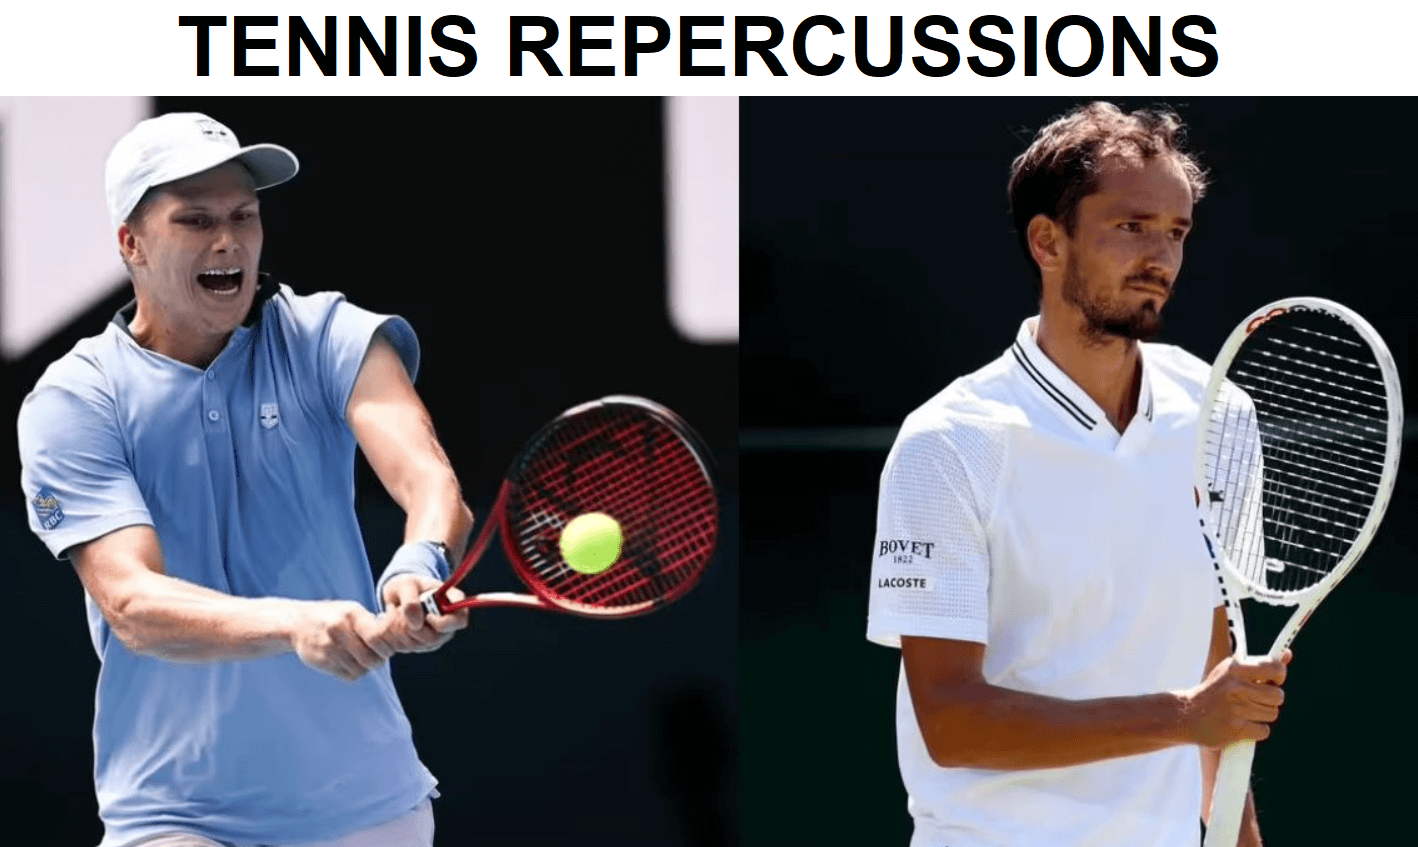 Tanking in tennis - The Repercussions